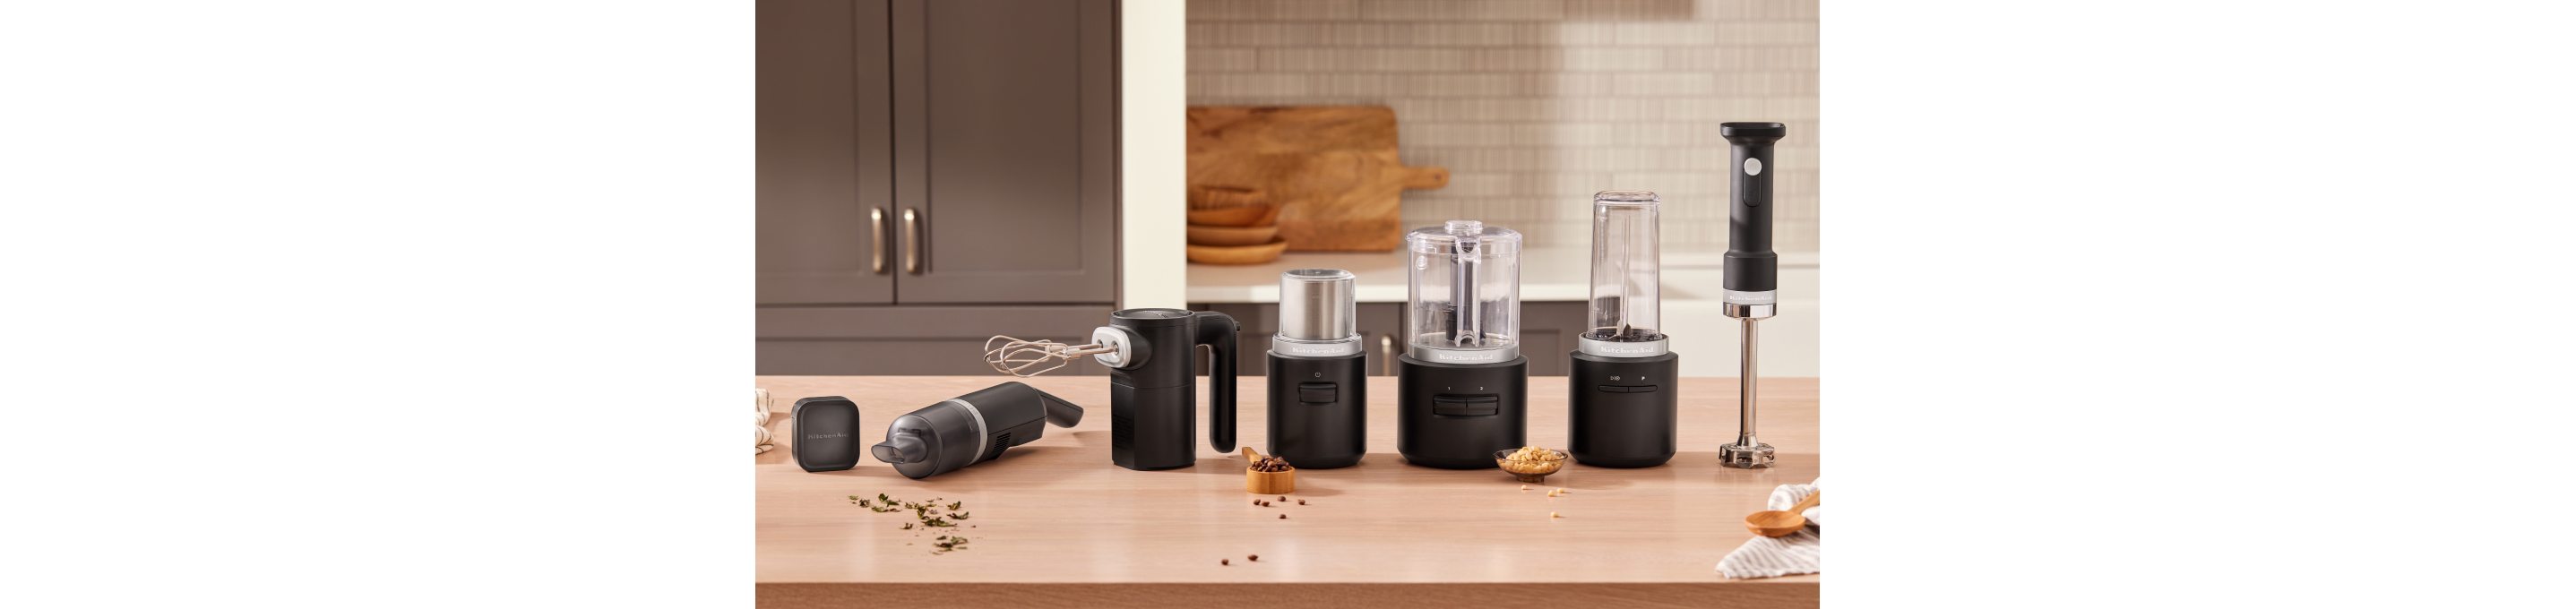 From KitchenAid a range of cordless appliances for food preparation - Home  Appliances World